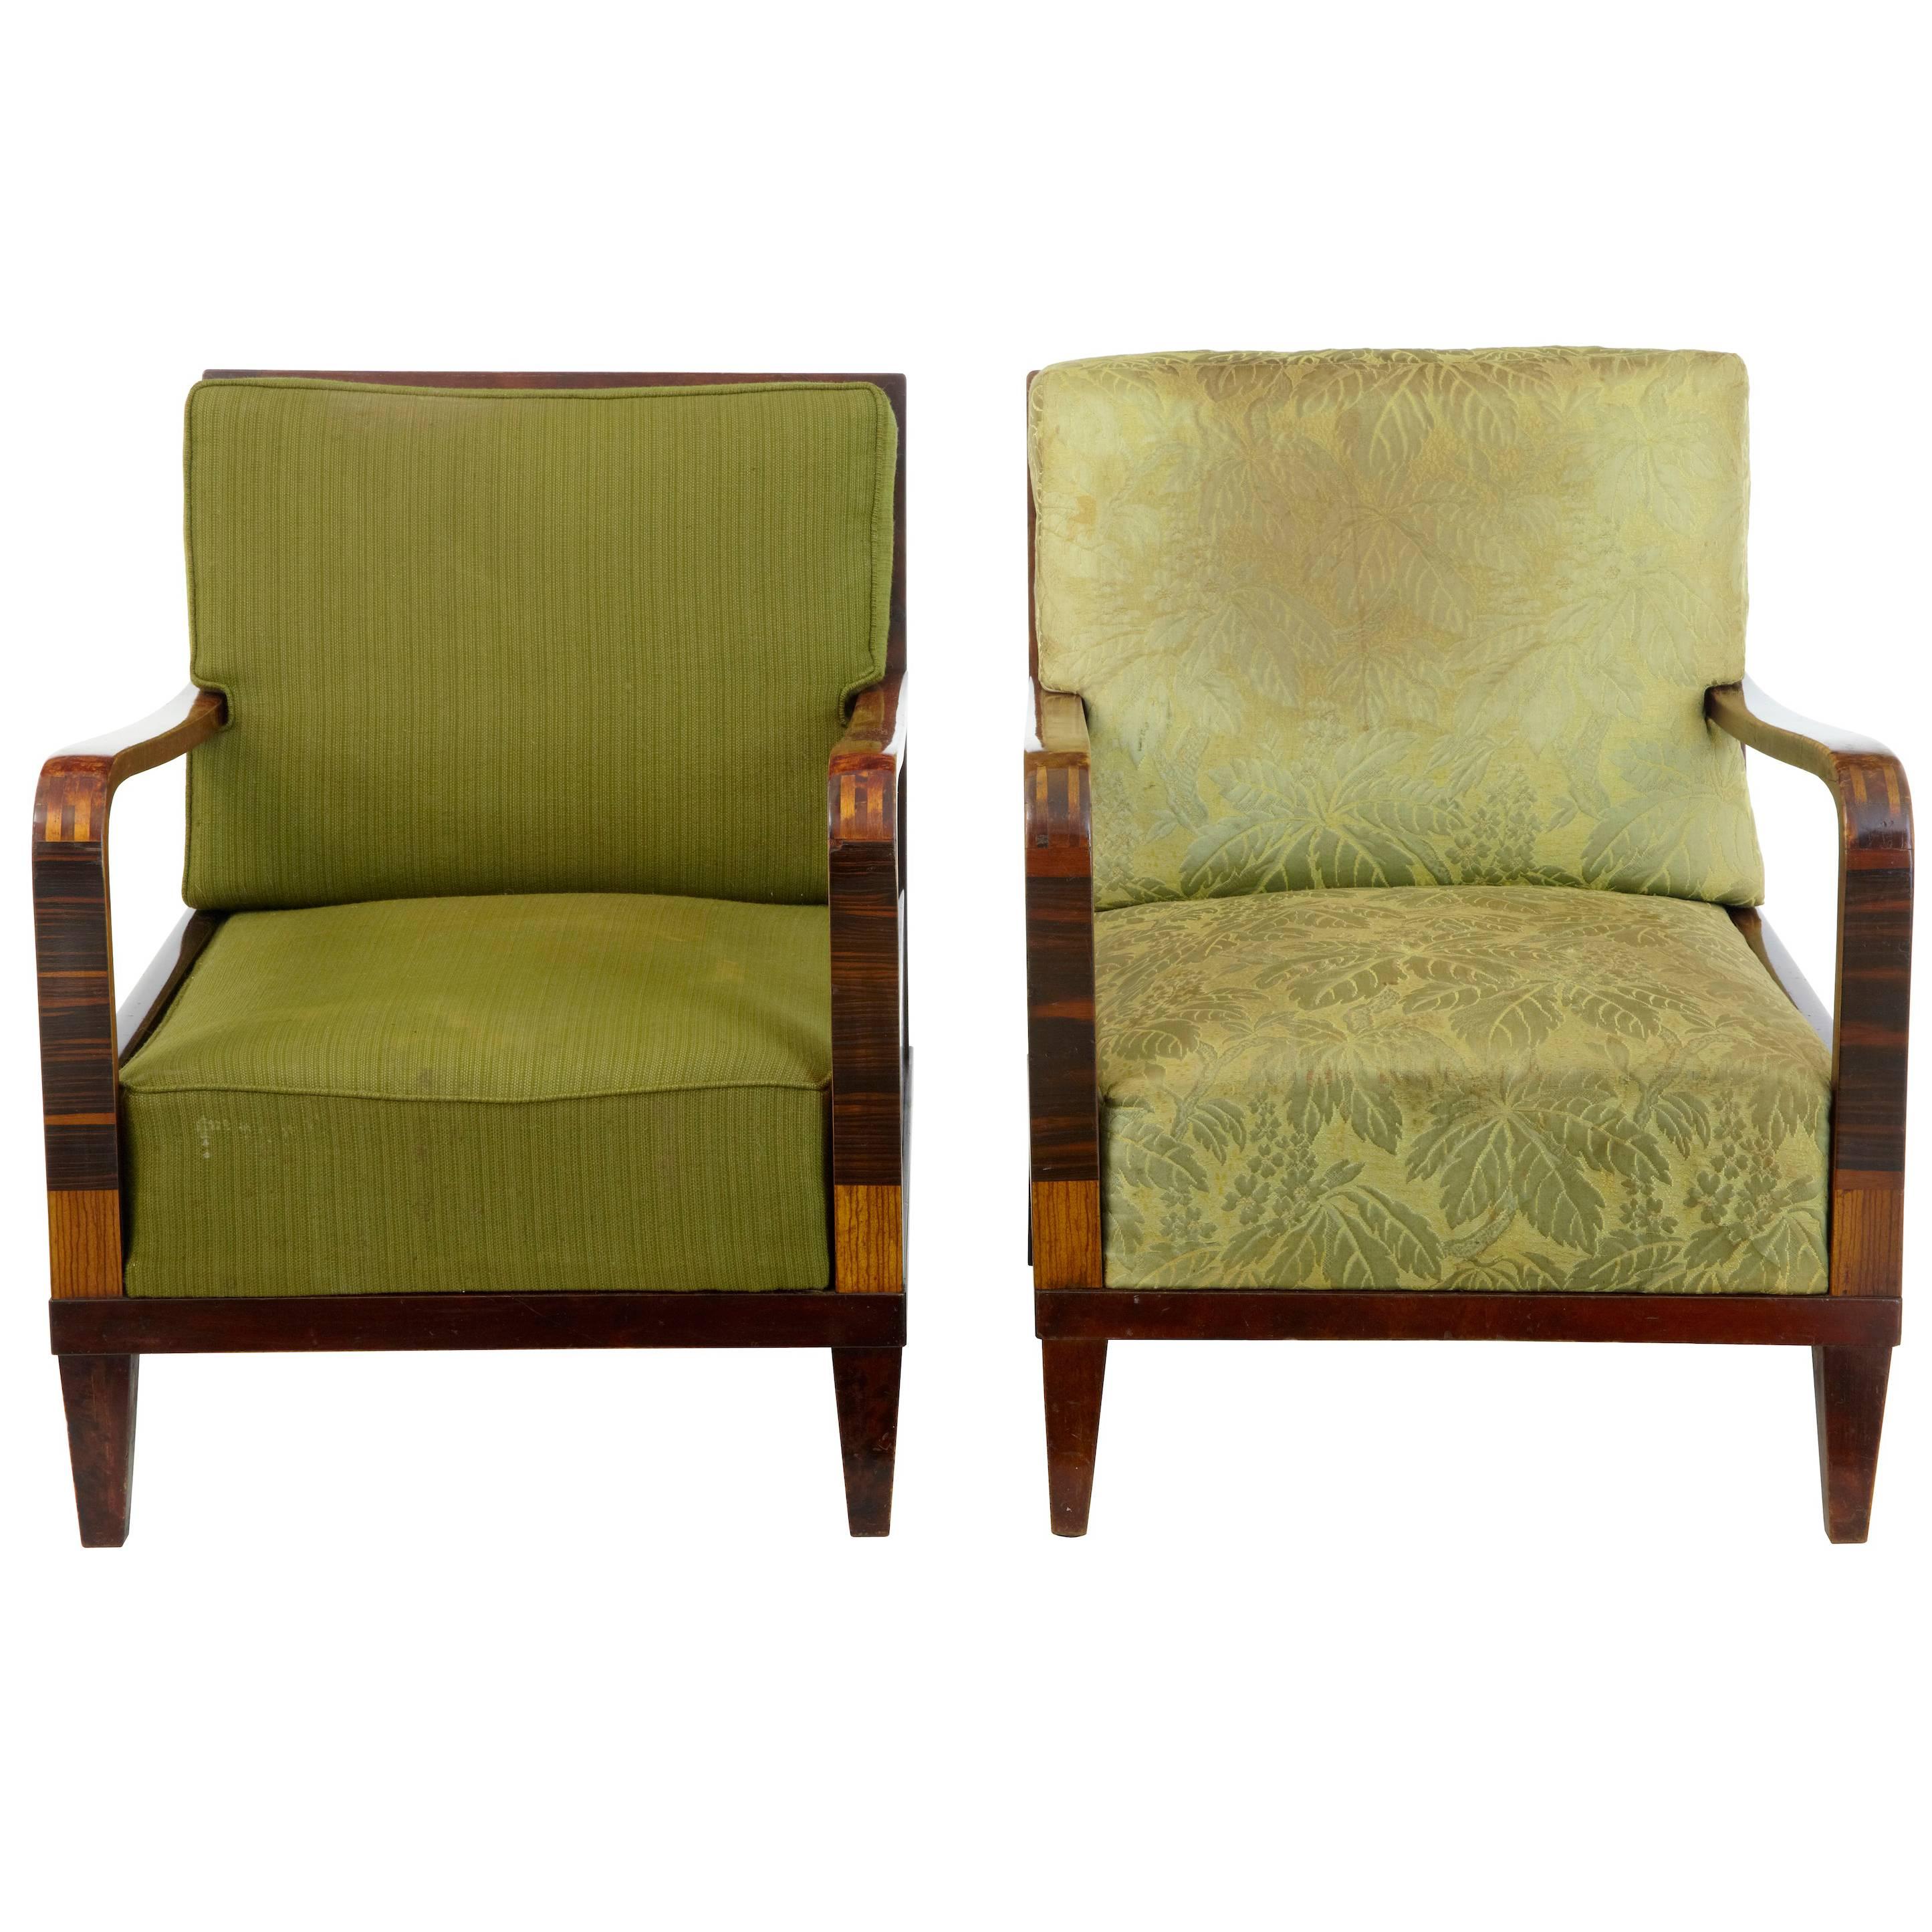 Pair of 1920s Art Deco Birch Lounge Chairs